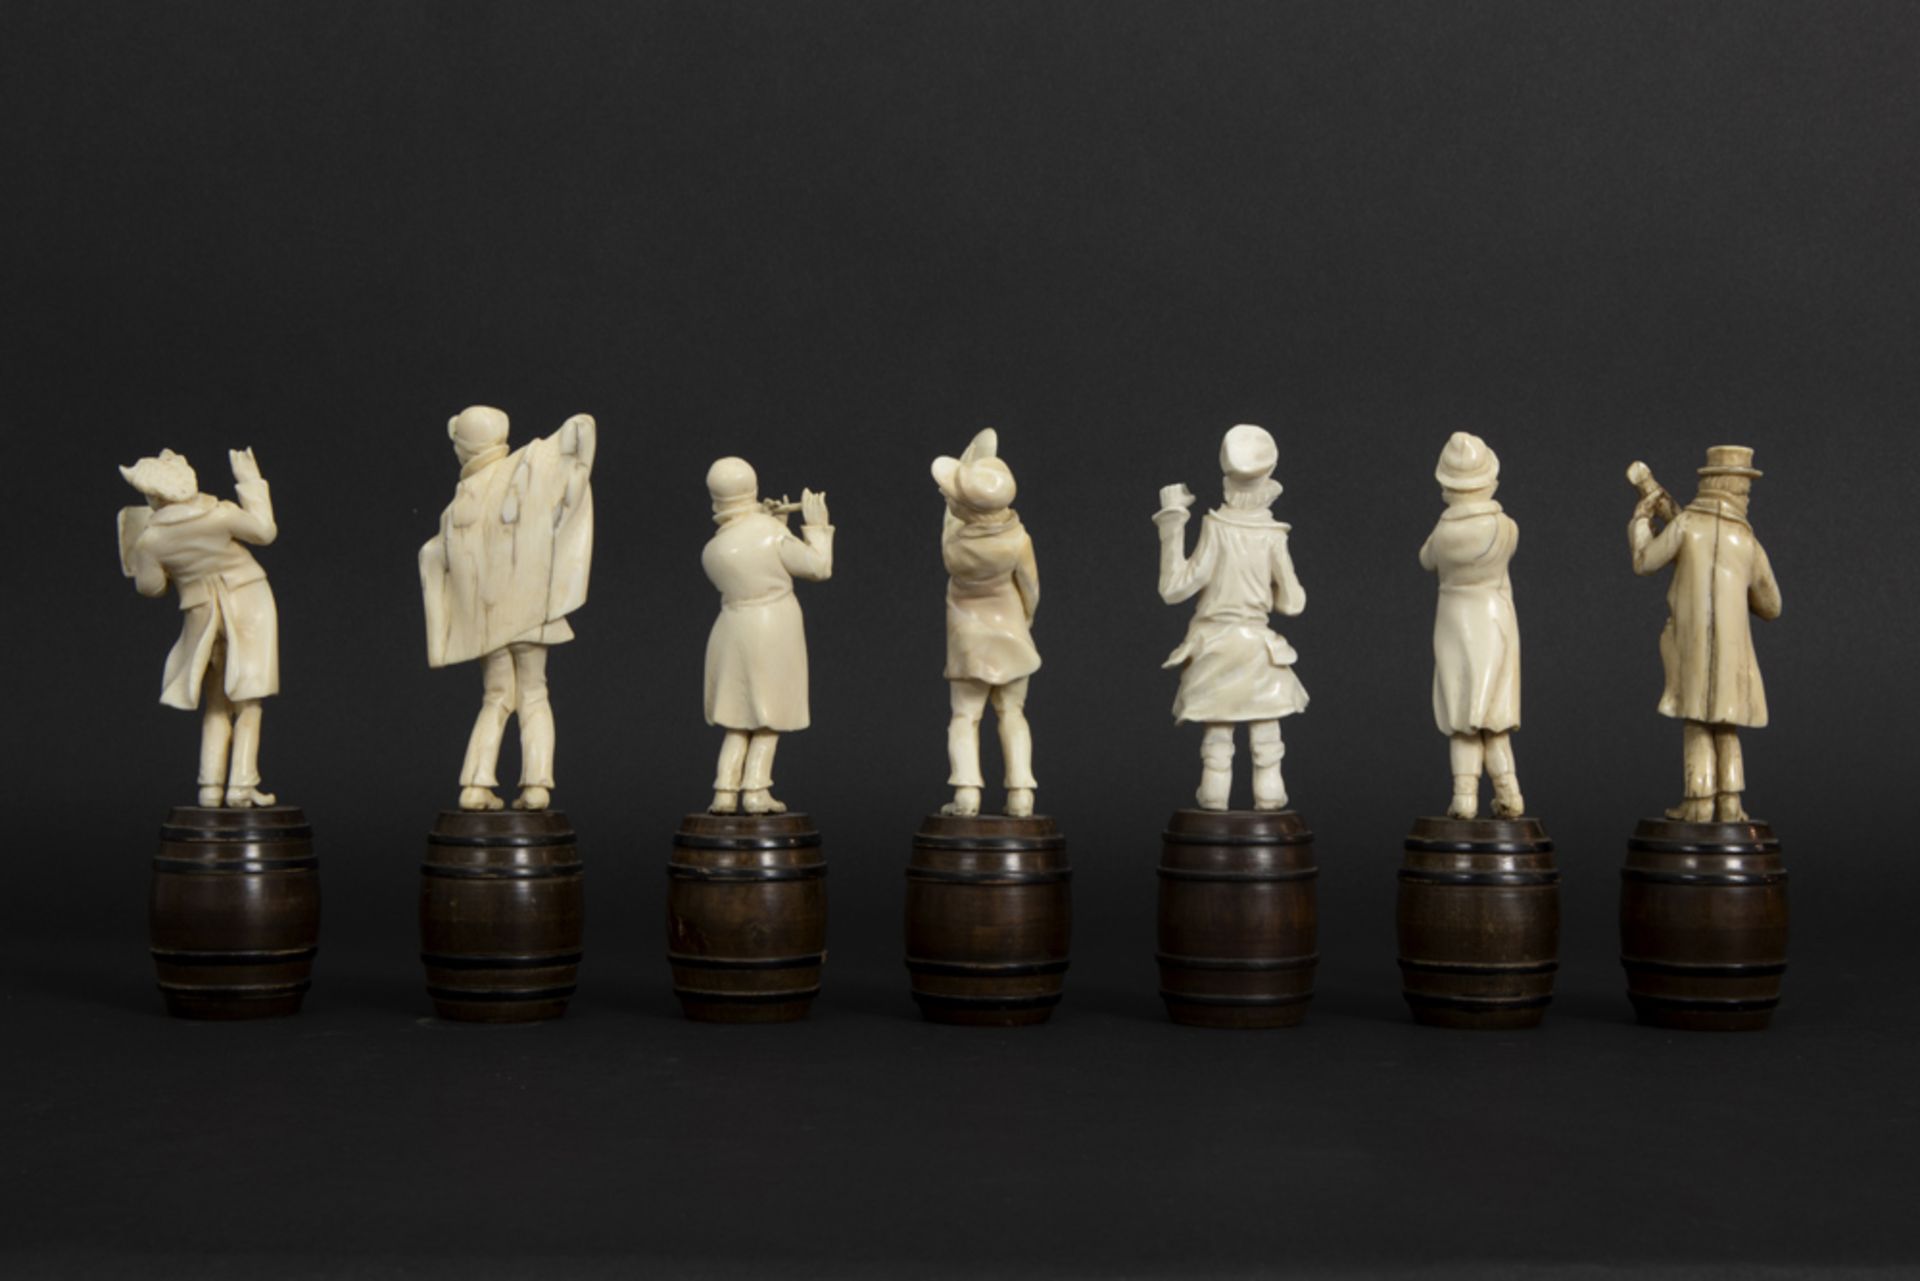 set of seven small antique figures in ivory, each standing on a wooden barrel - depicting a band - Image 5 of 6